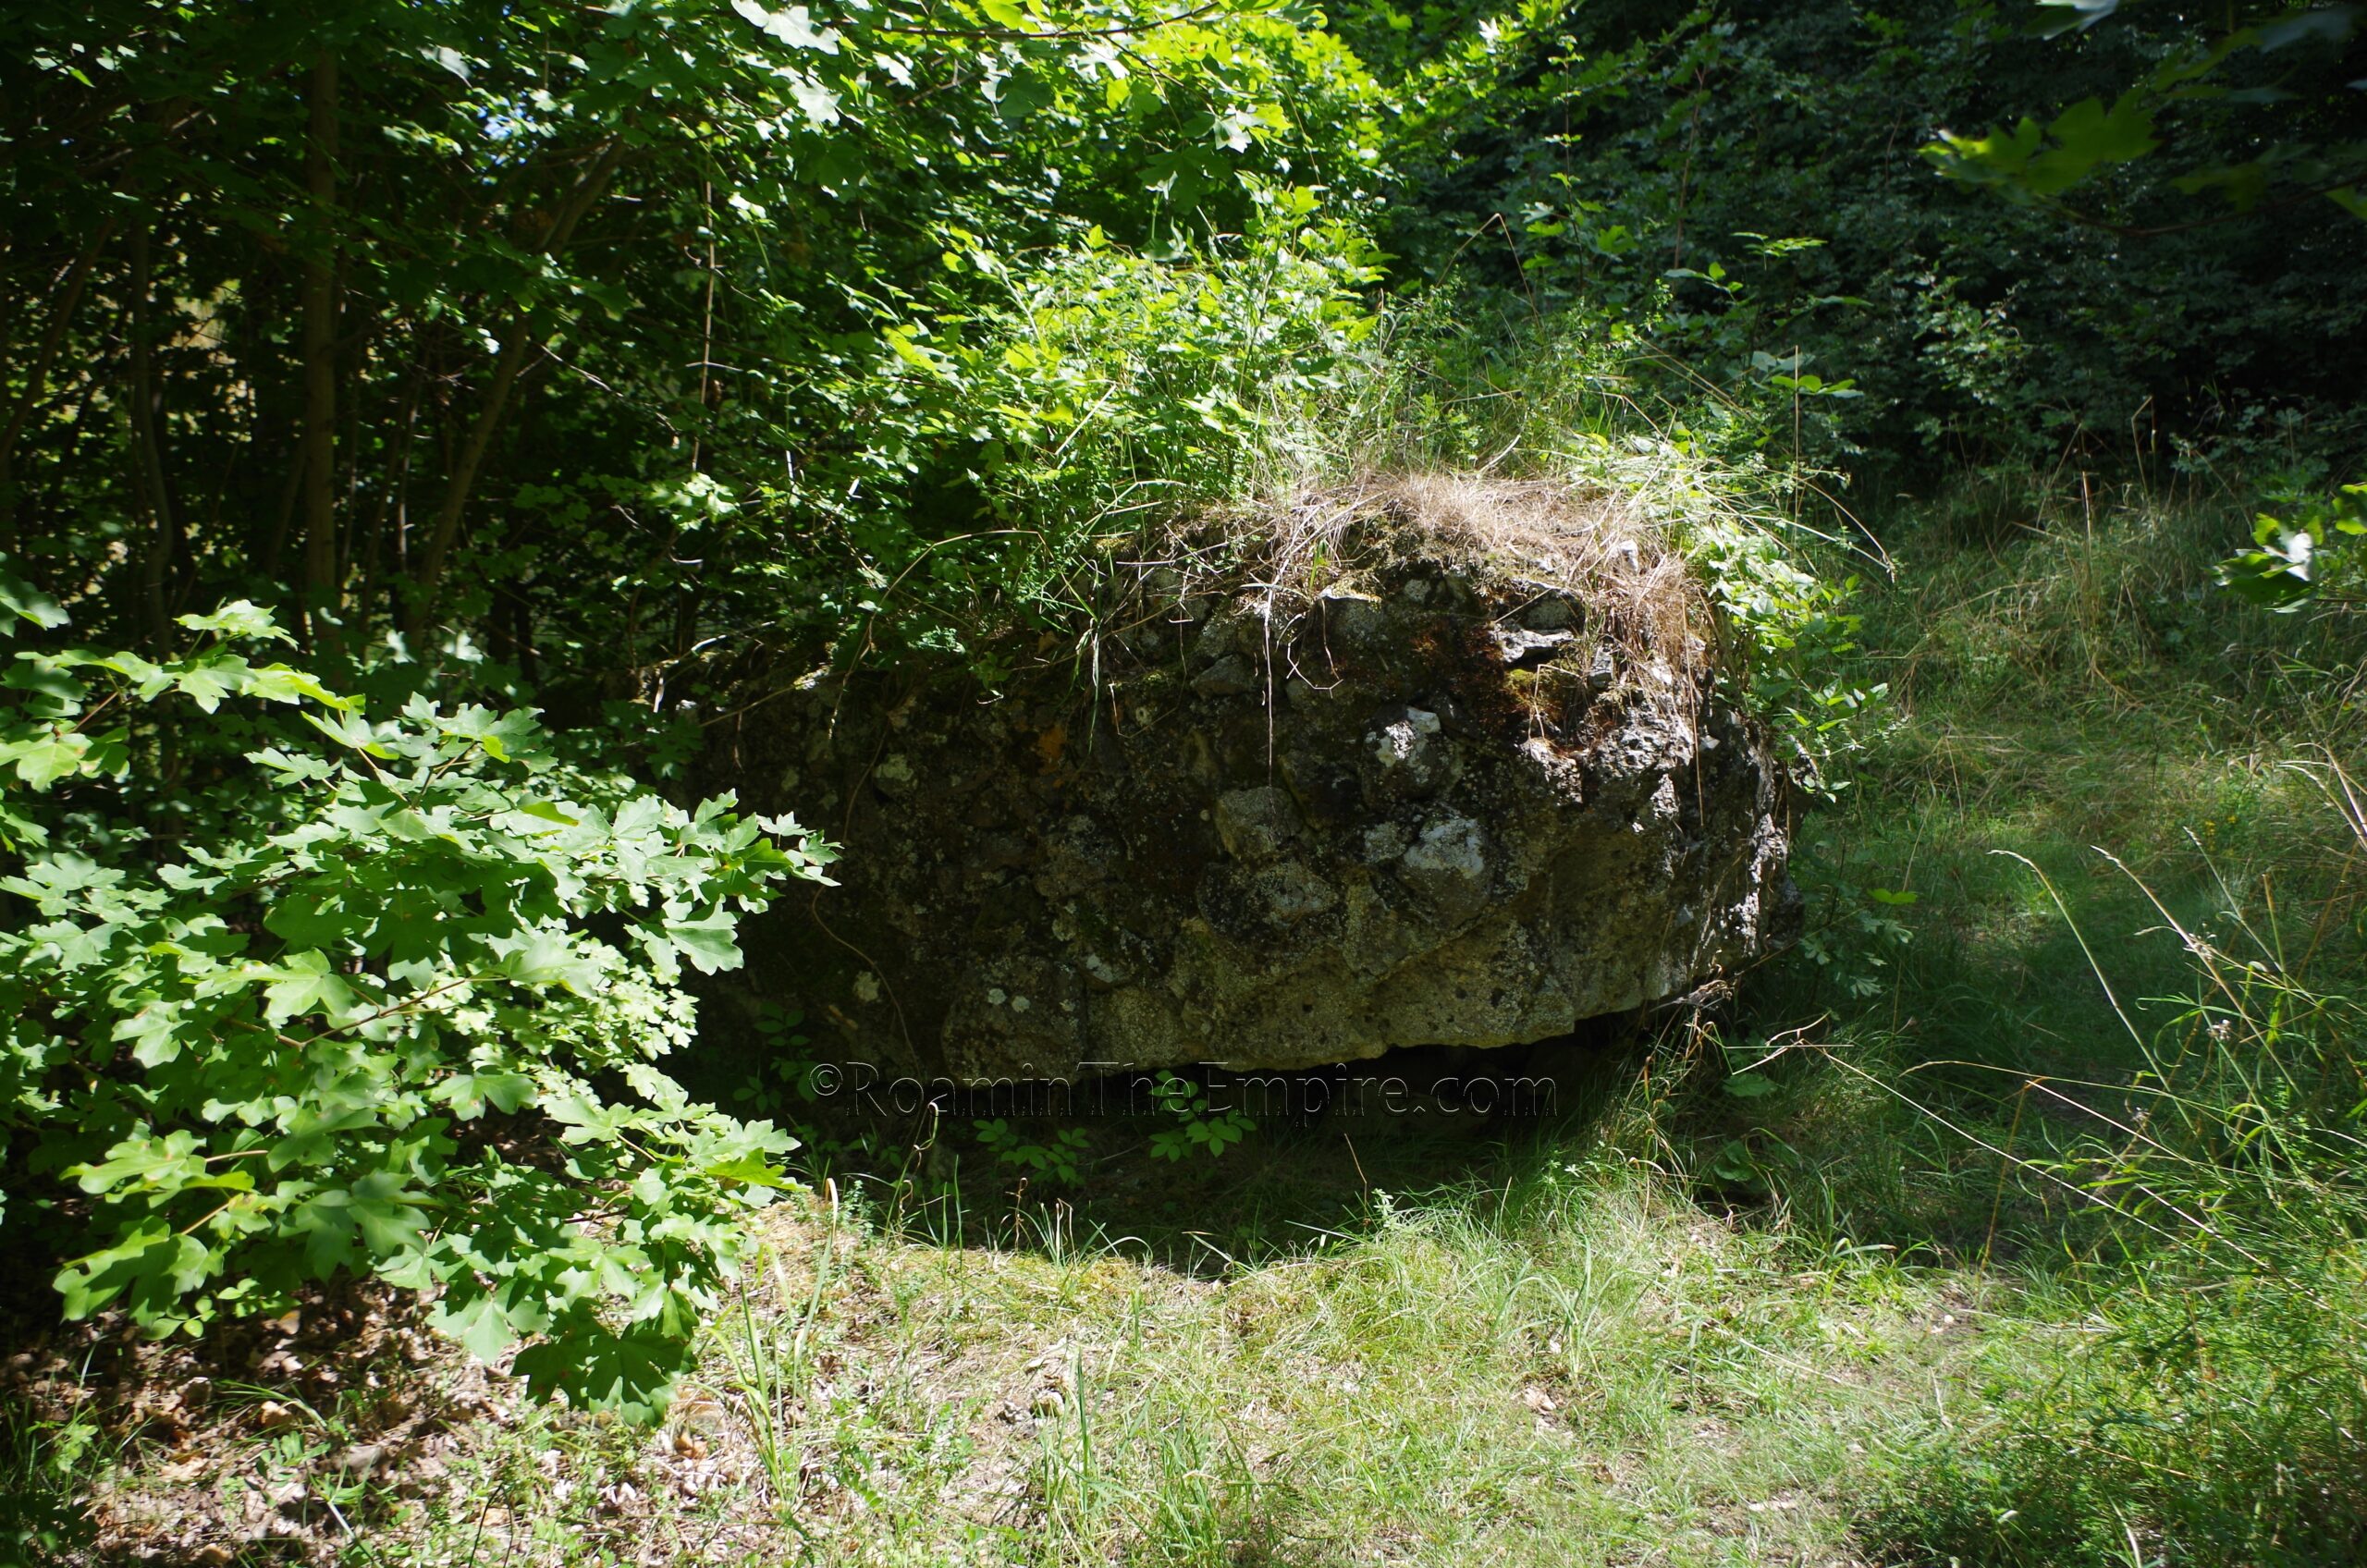 Remains of the eastern gate of the legionary camp.